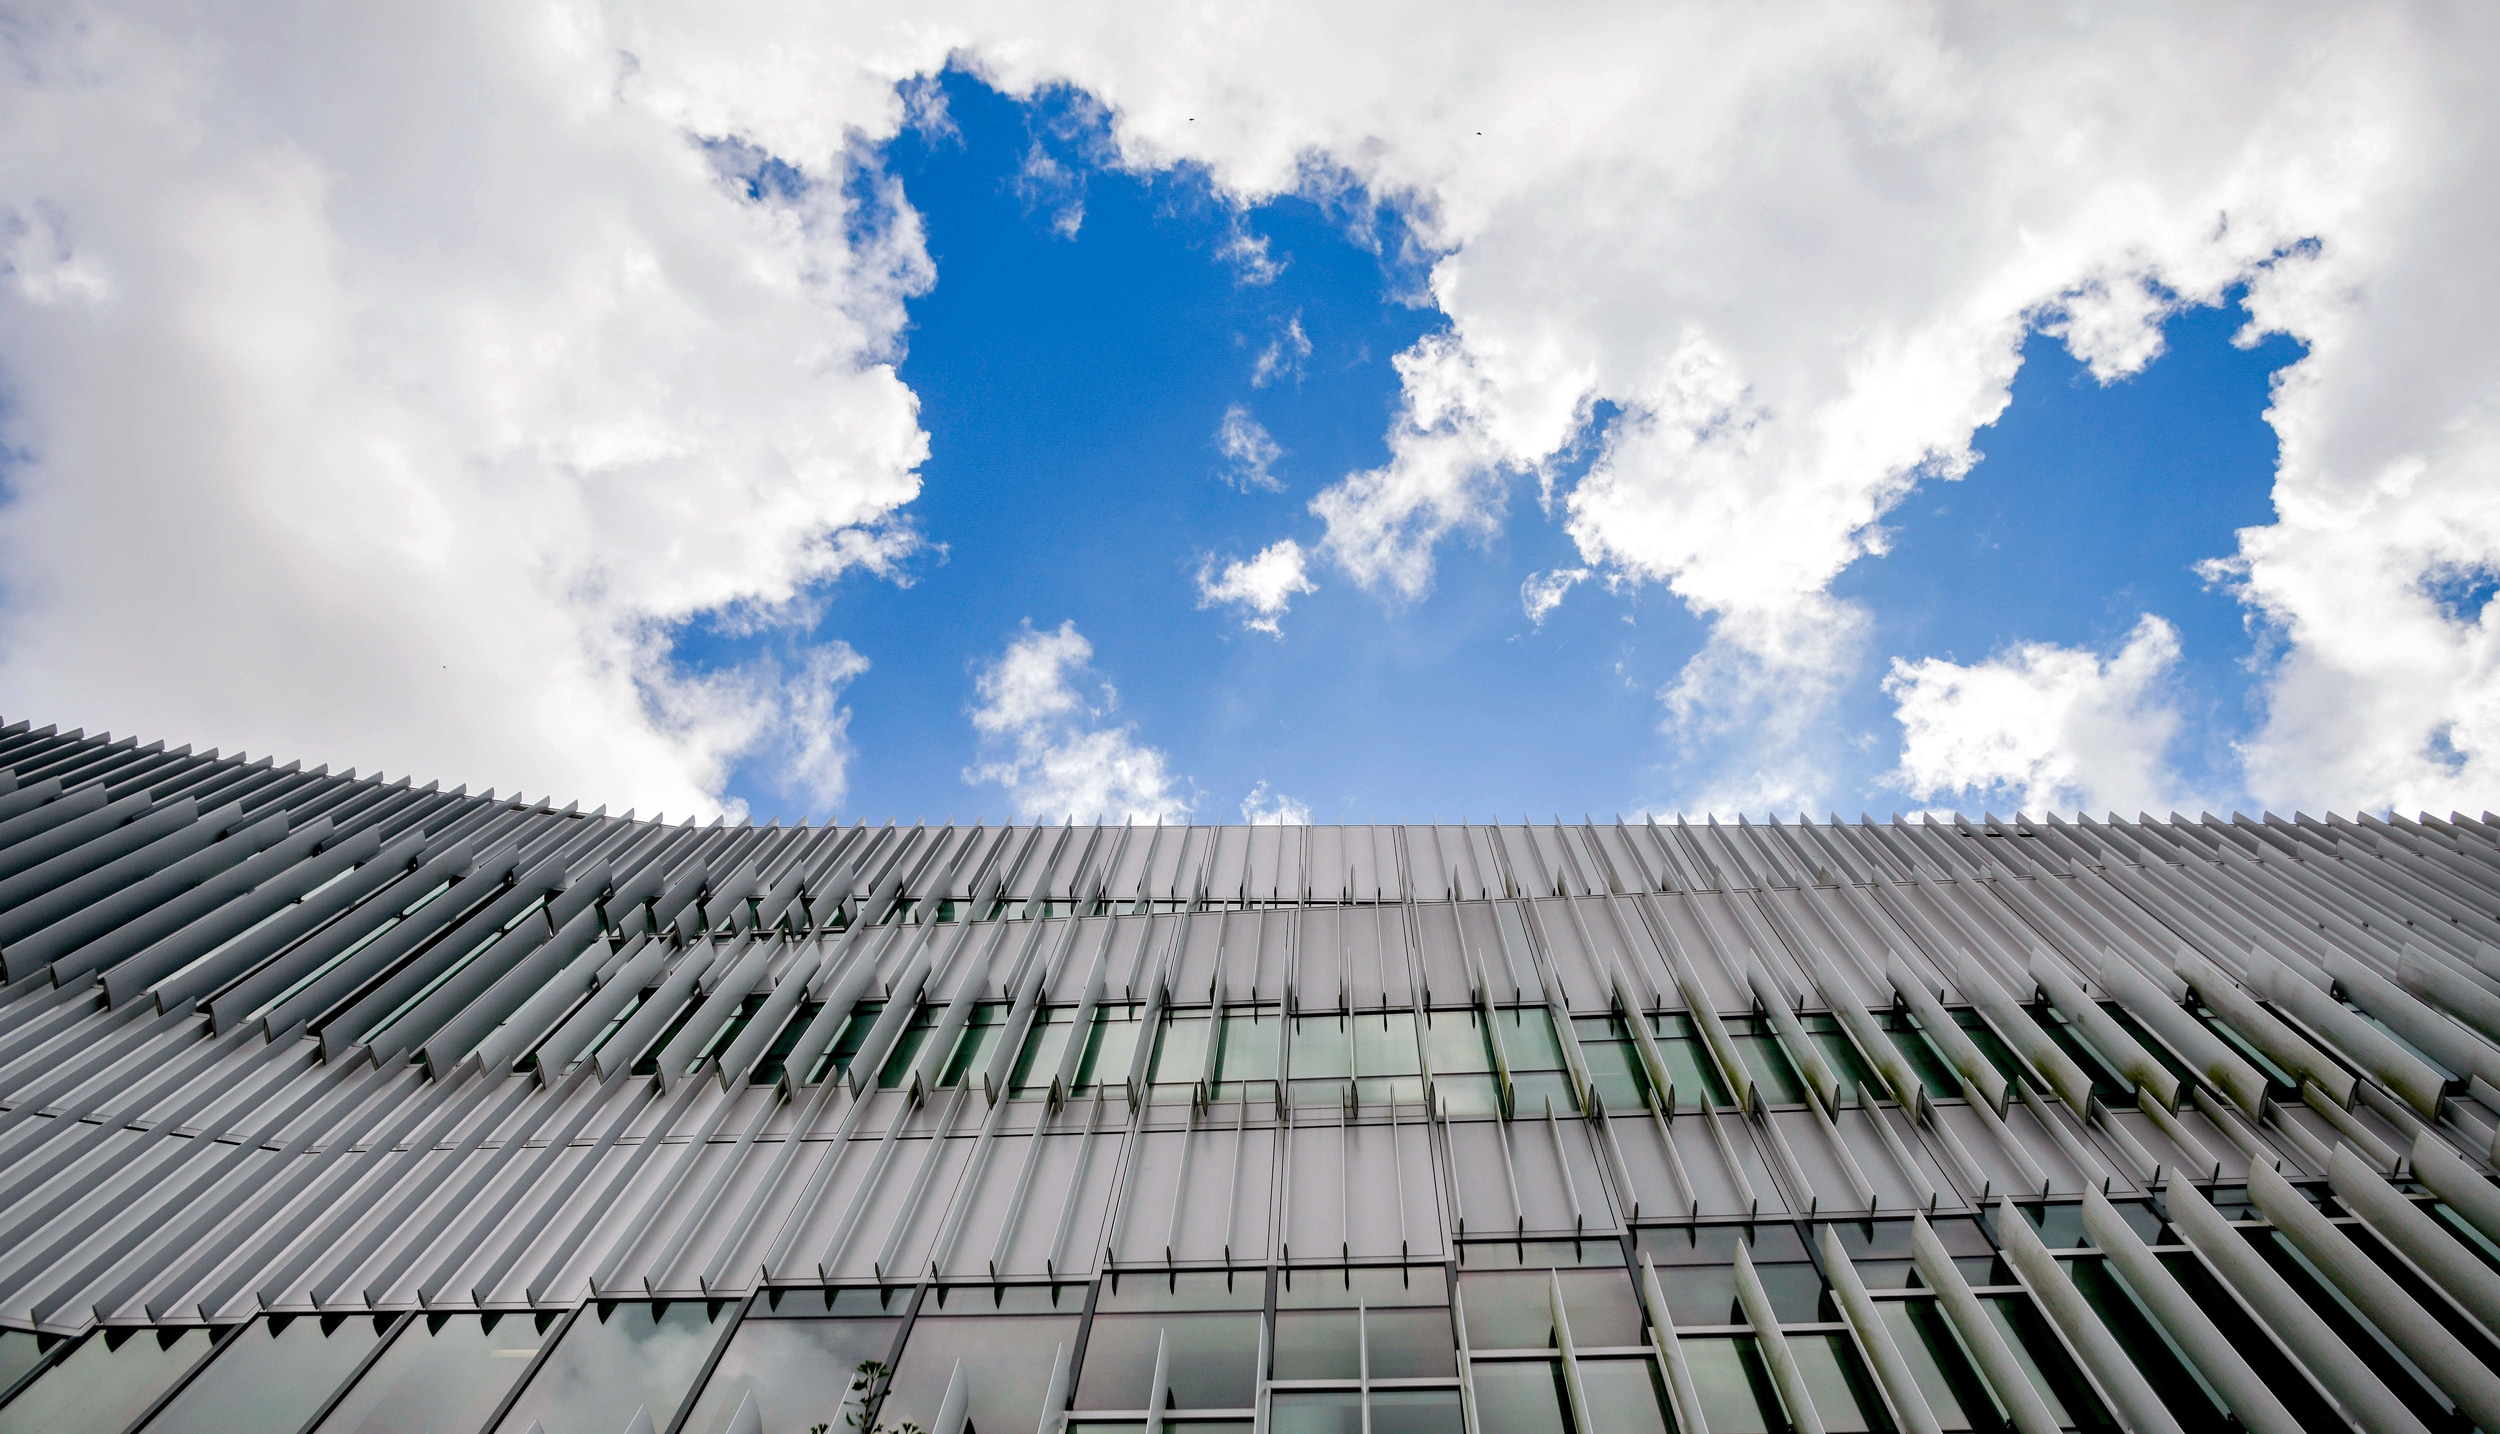 Hunt Library under parting clouds and blue skies. 